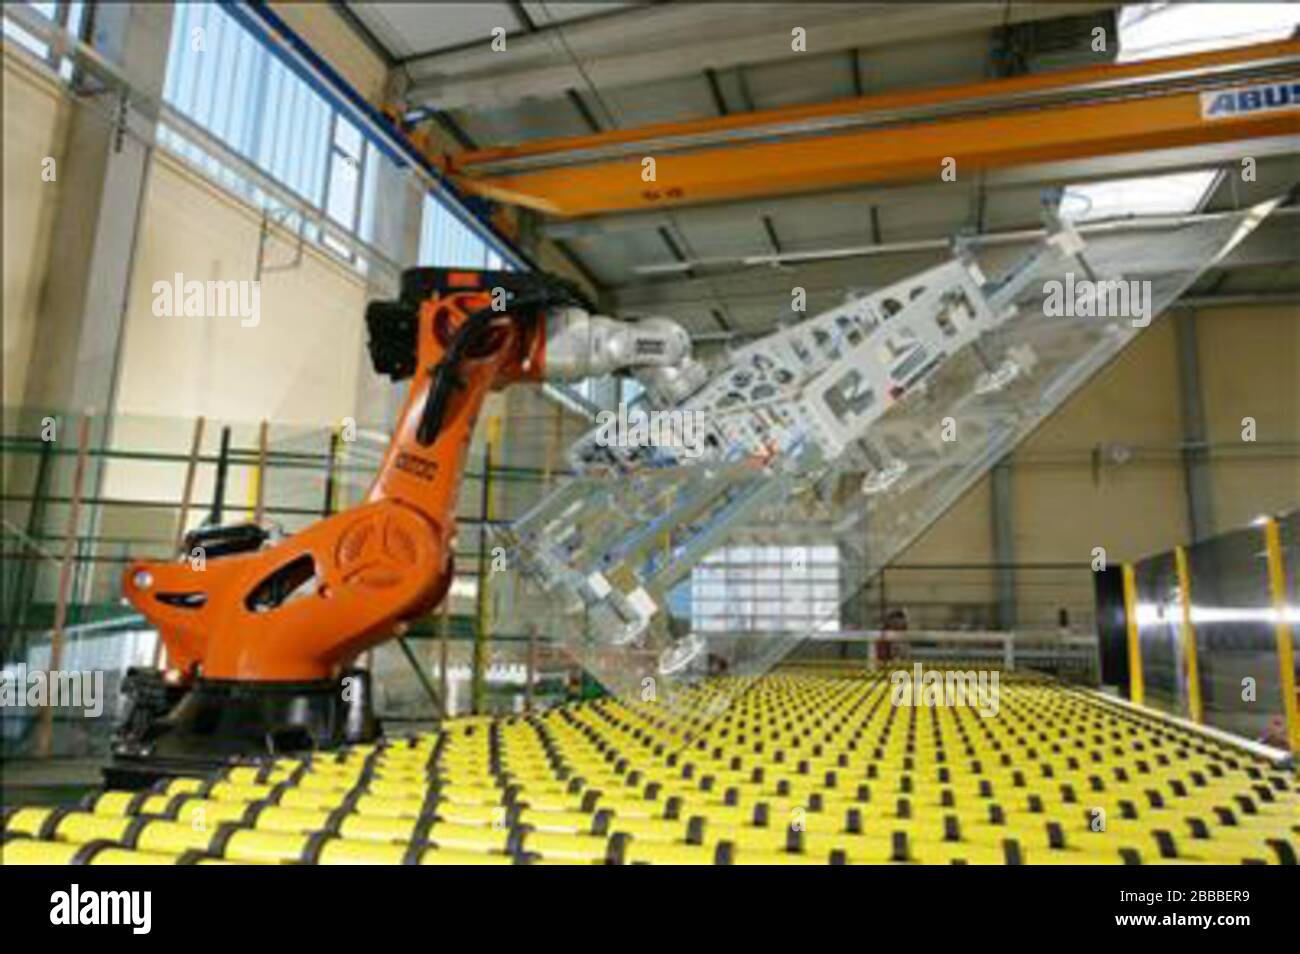 'Factory Automation with industrial robots for material handling in flat glass industry, company Grenzebach in Germany, robotics for high payloads,; 2003 gorilla; KUKA Roboter GmbH, Zugspitzstraße 140, D-86165 Augsburg, Germany, Dep. Marketing, www.kuka-robotics.com; KUKA Roboter GmbH, Bachmann; ' Stock Photo